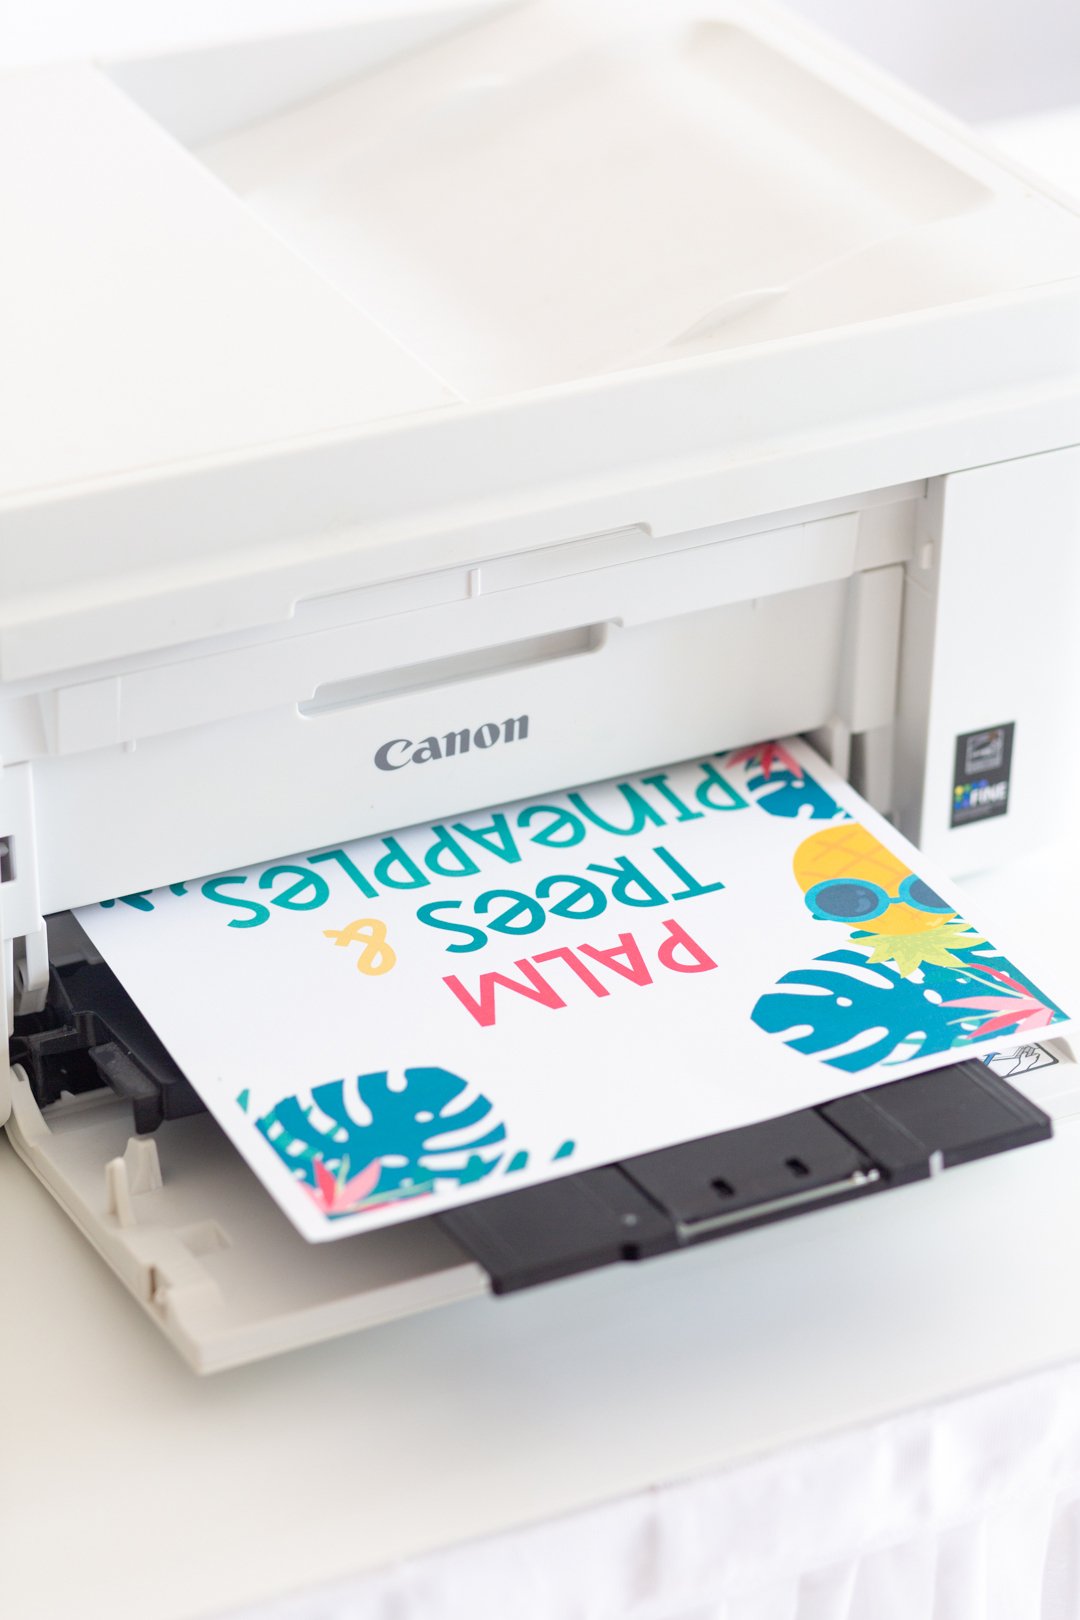 canon printer with colorful tropical party printable being printed